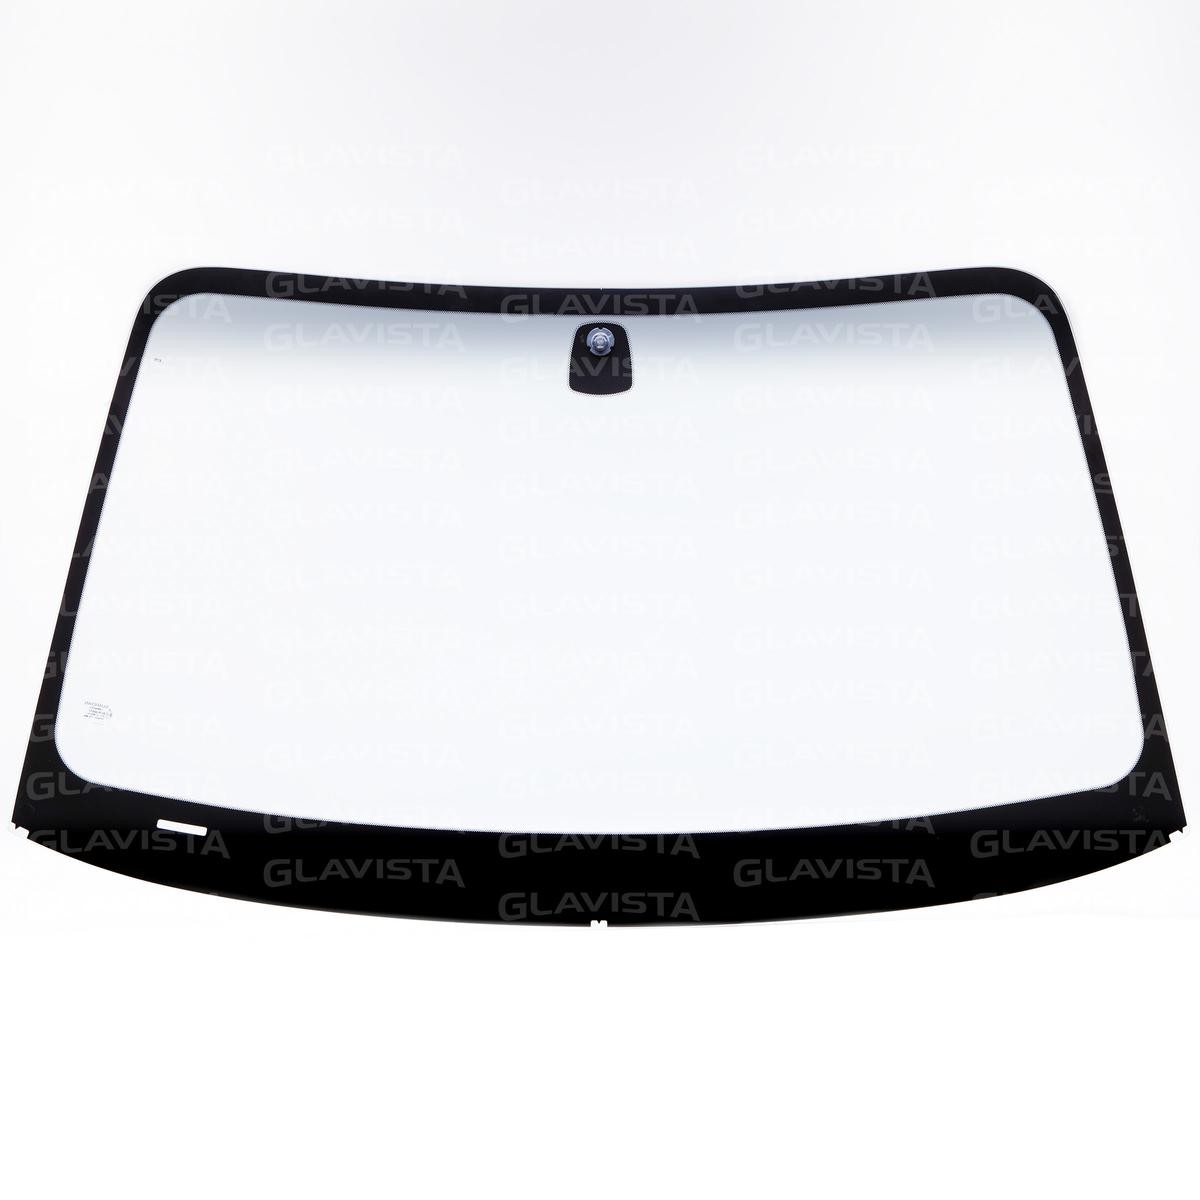 GLAVISTA with grey top, with mirror holder, with sight window for vehicle identification number (VIN), green Windshield WS2448GYS buy